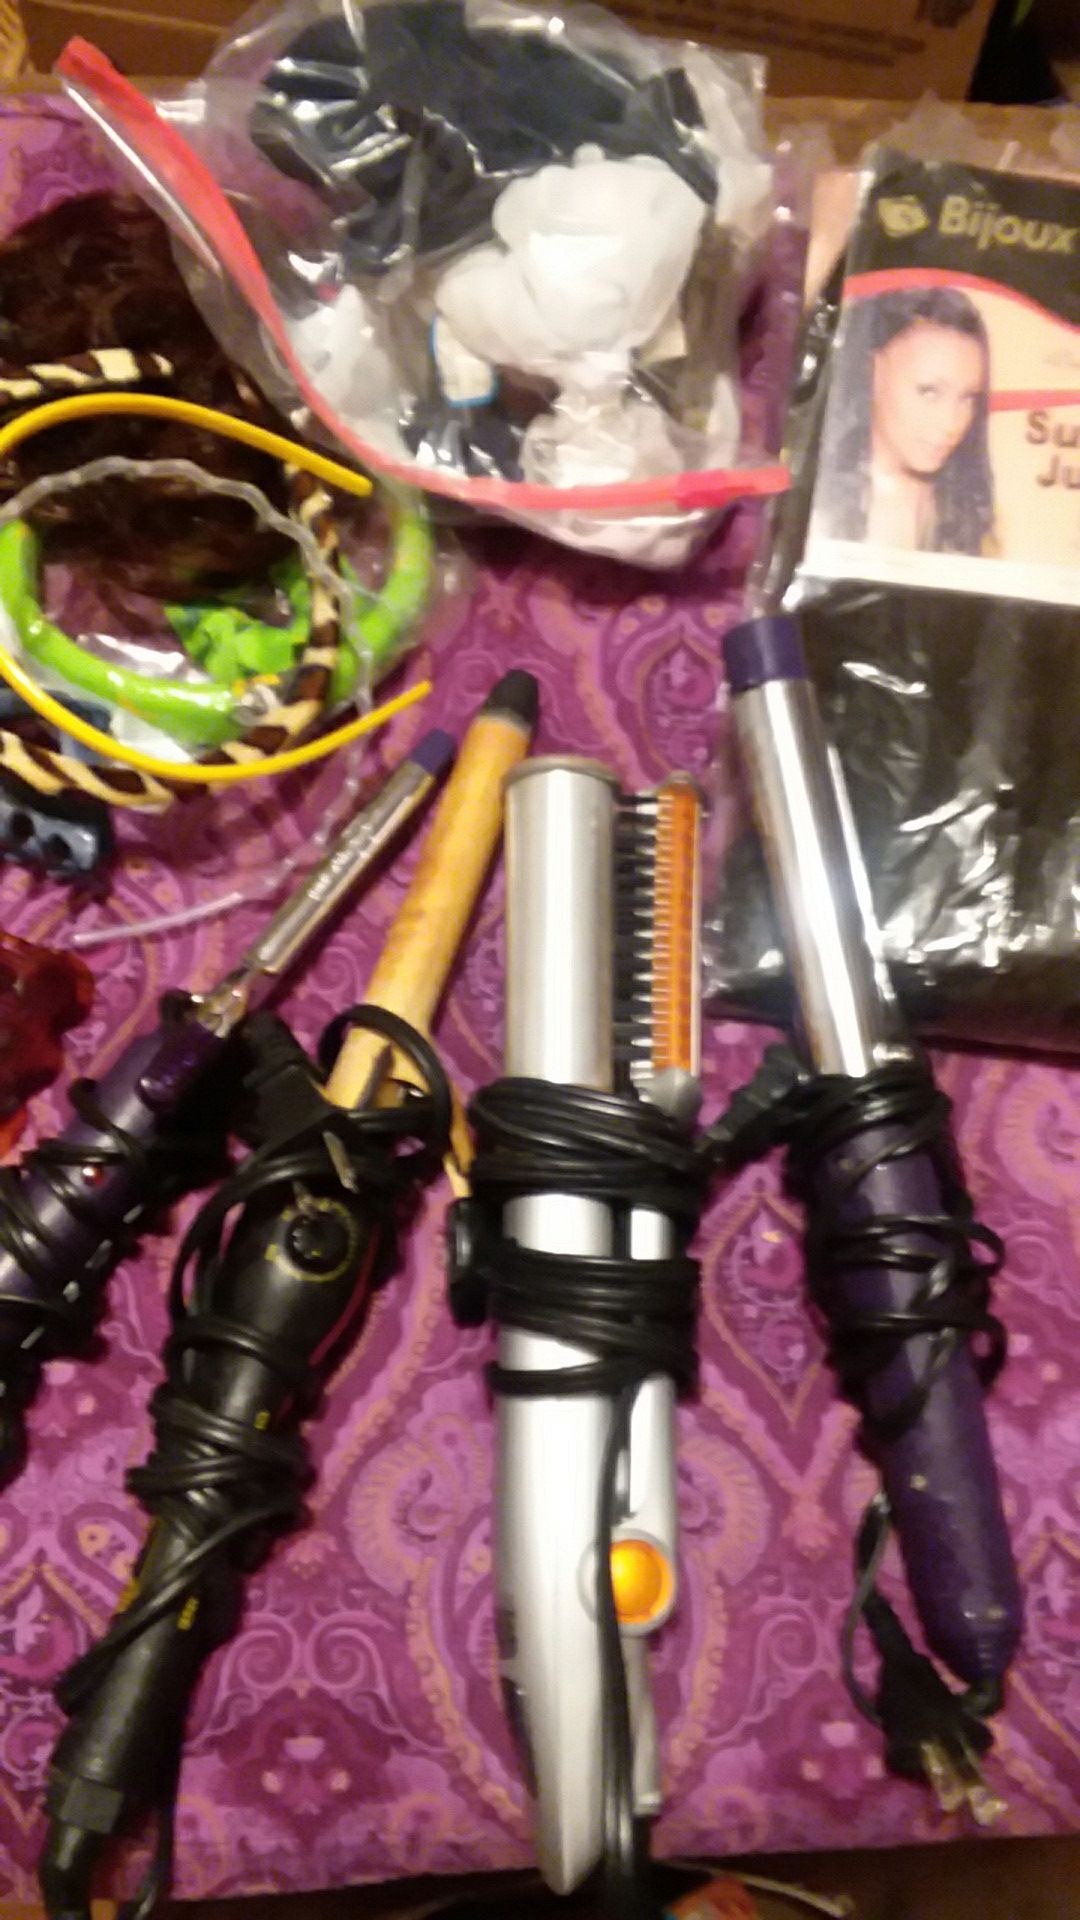 Hair straighteners and hair accessories